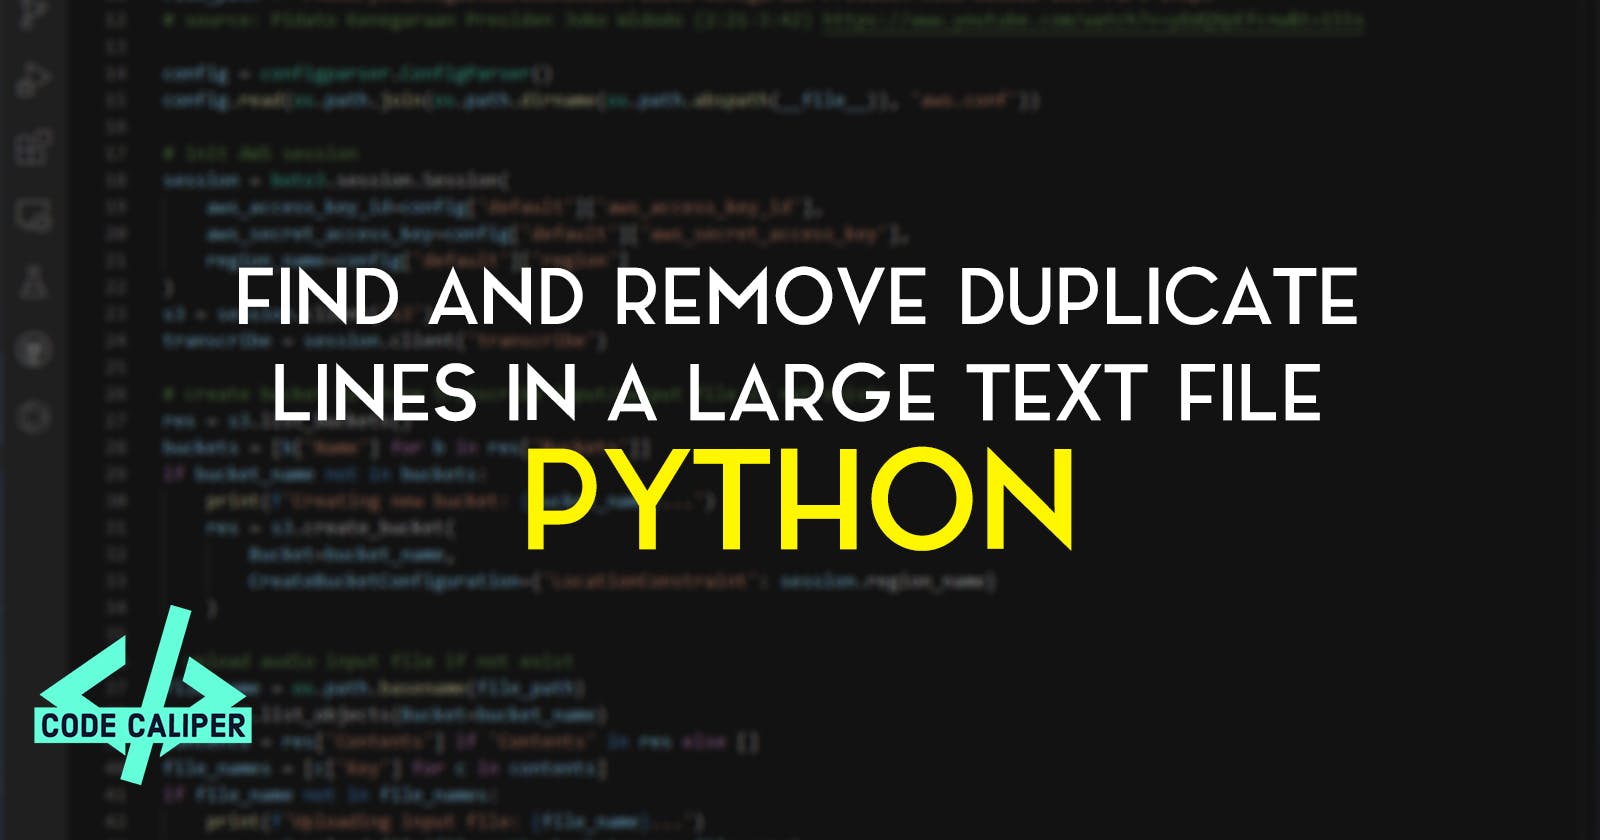 Python Program to Find and Remove Duplicate Lines in a Large Text File